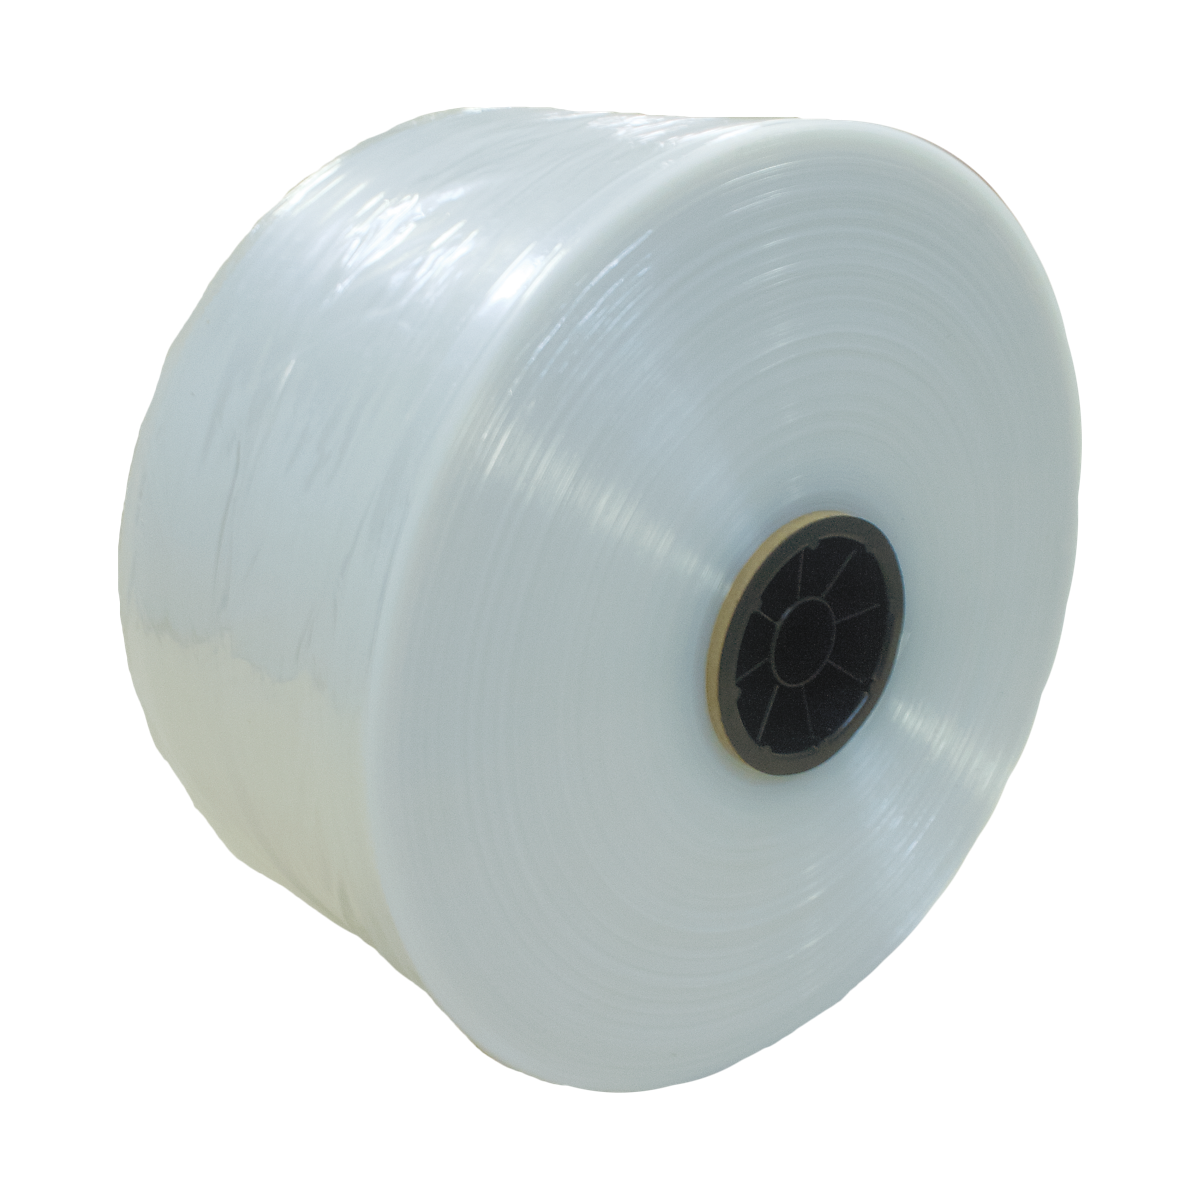 https://rowleycompany.scene7.com/is/image/rowleycompany/rowley-clear-plastic-tubing-by-the-roll-psbweb?$s7Product$&fmt=png-alpha